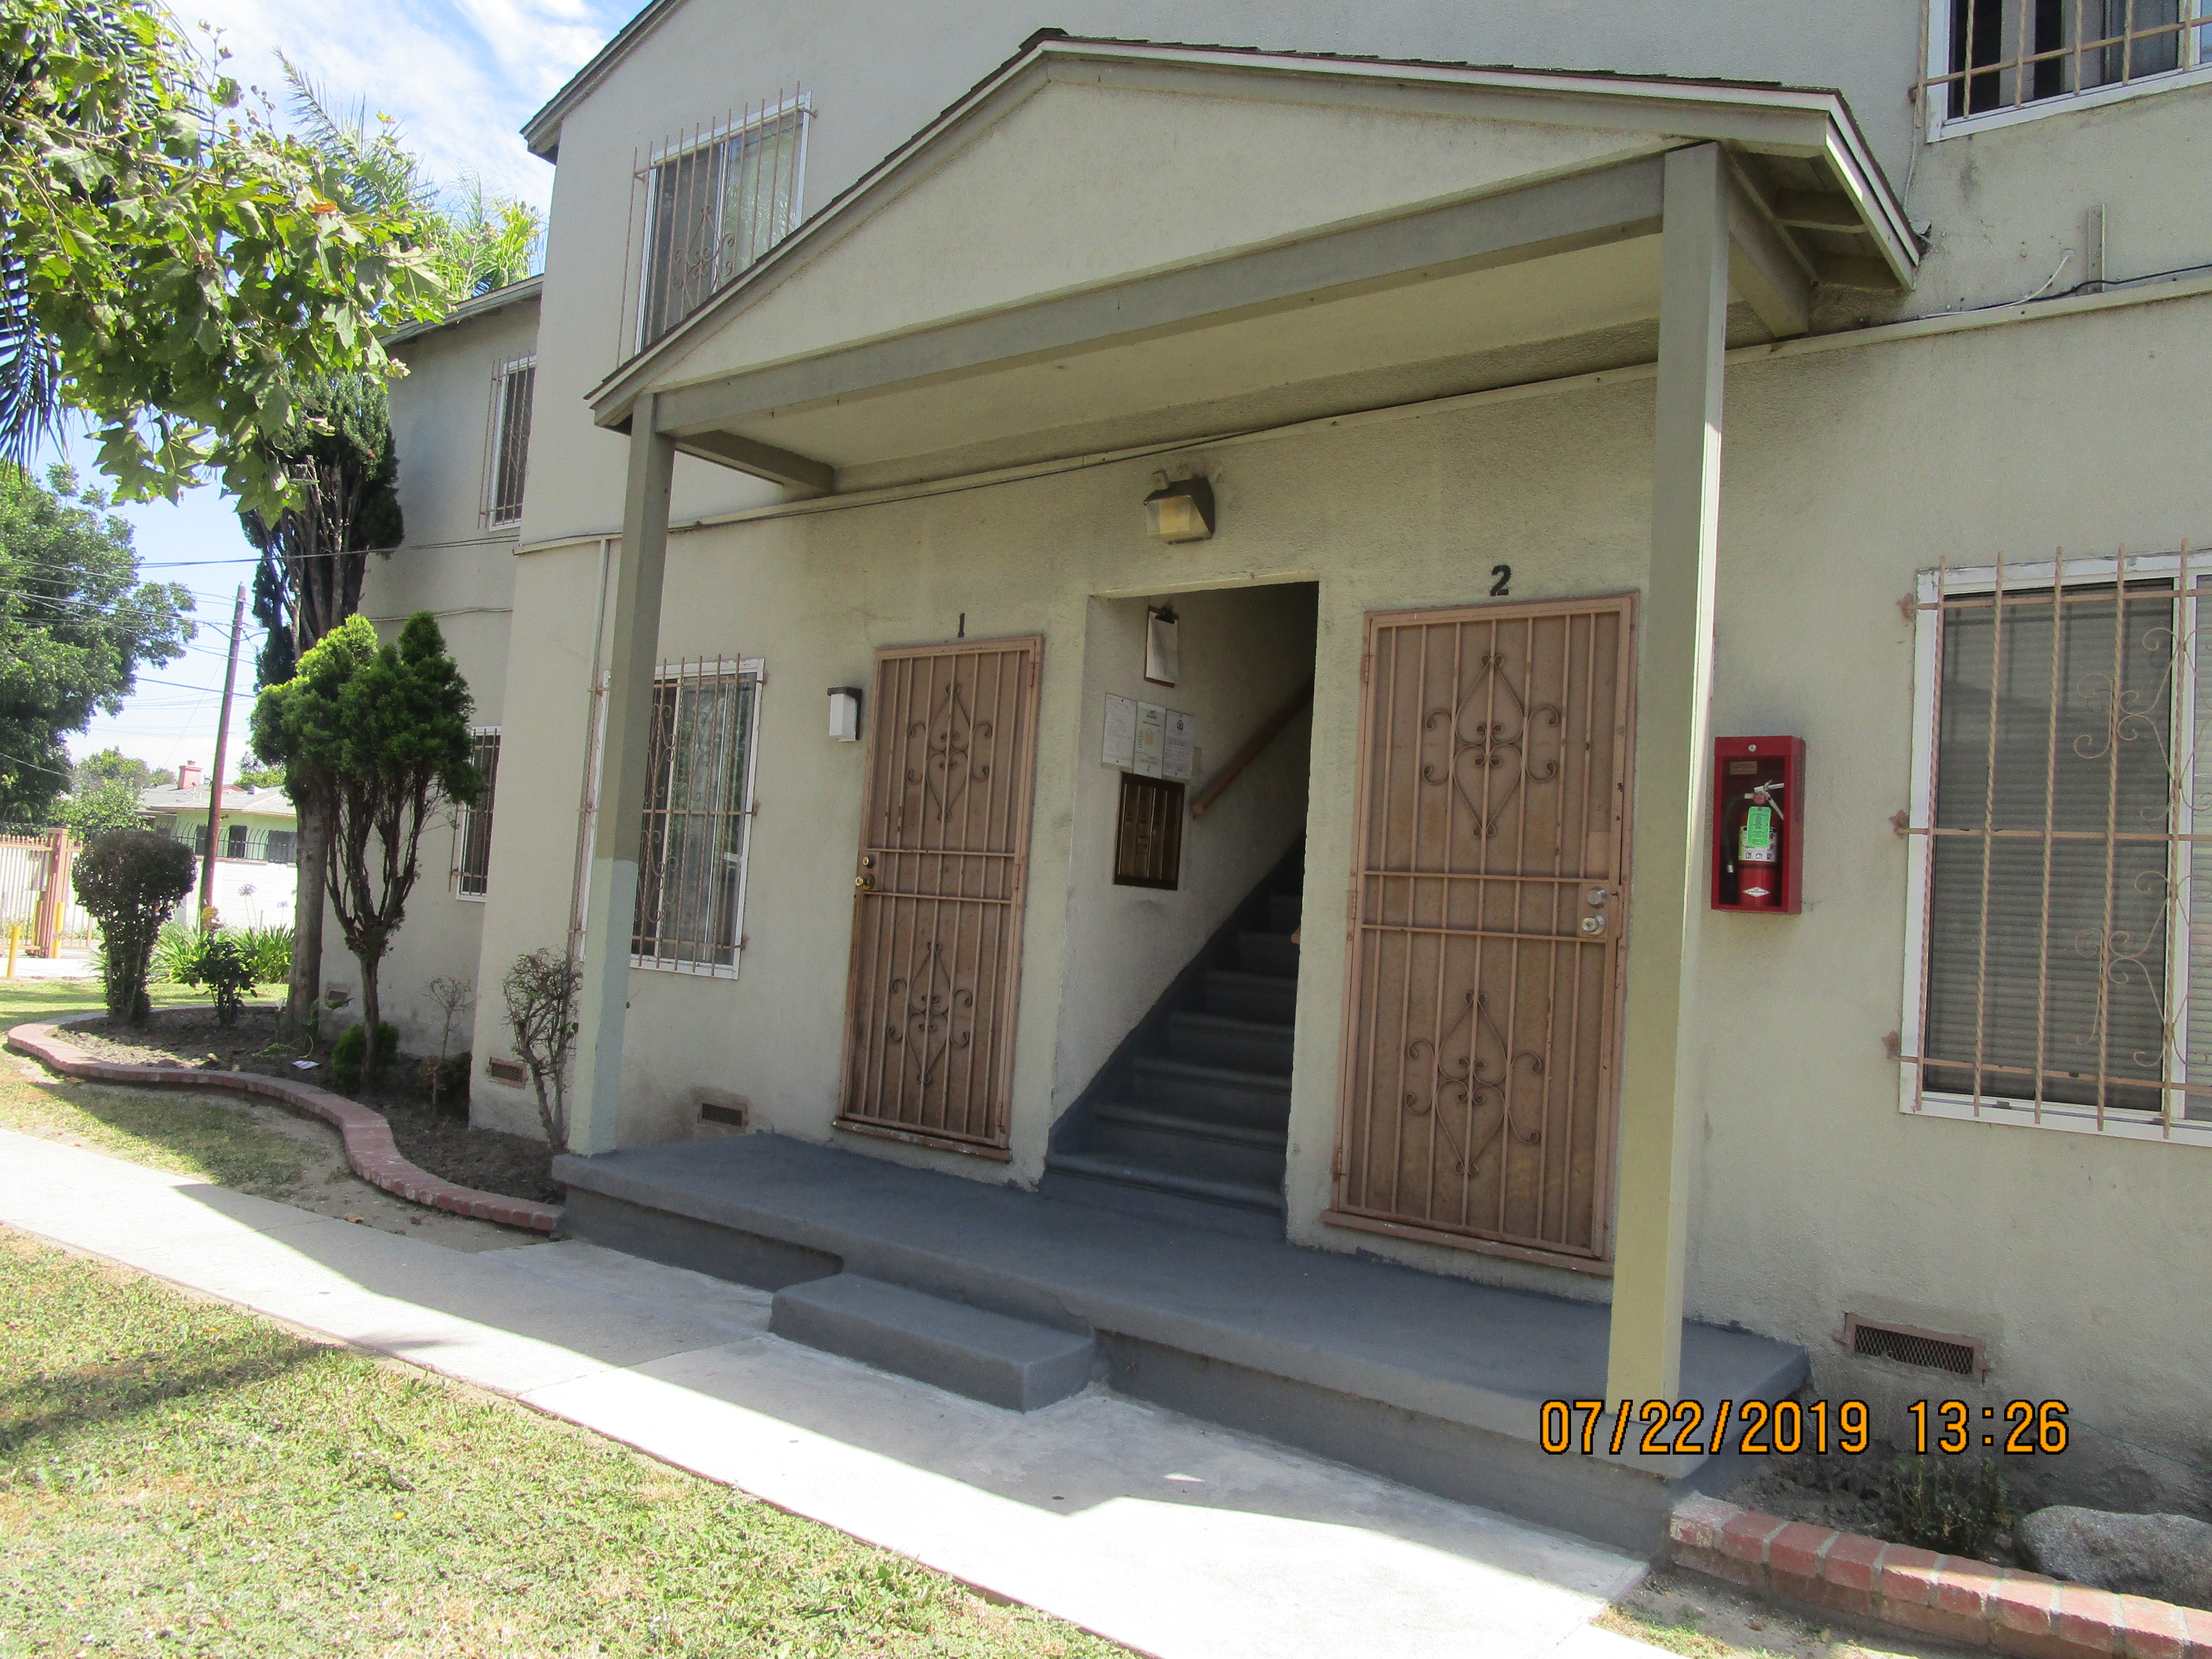 Close up view of the front entrance to the property with doors to ground level units and stairs leading to the upper level